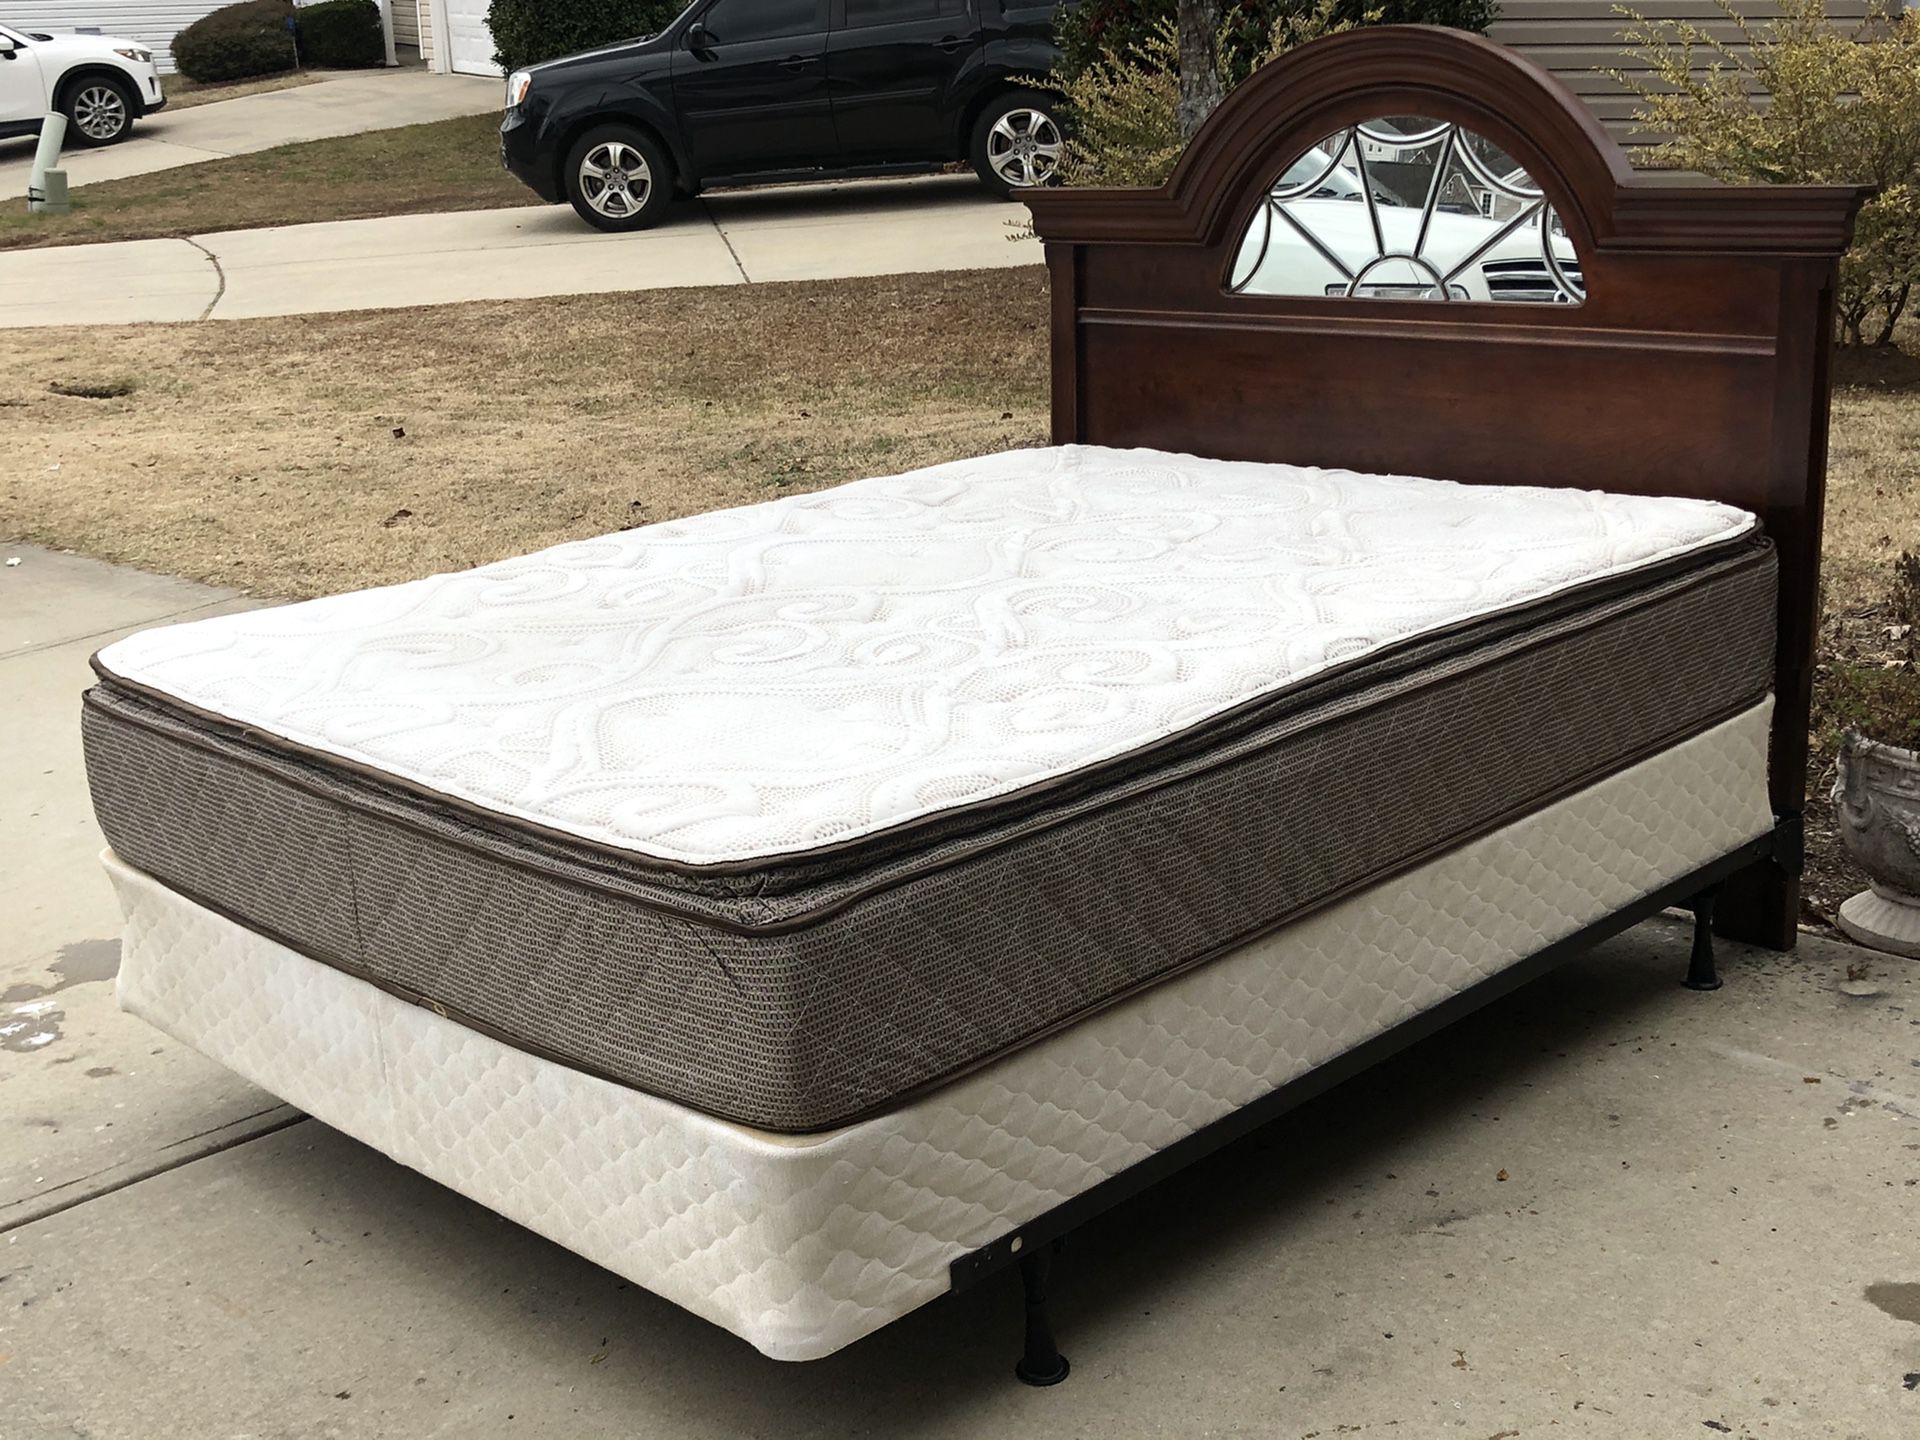 Queen Bed with Headboard, Mattress, boxspring and Rail. Very good condition. Hablar espanol